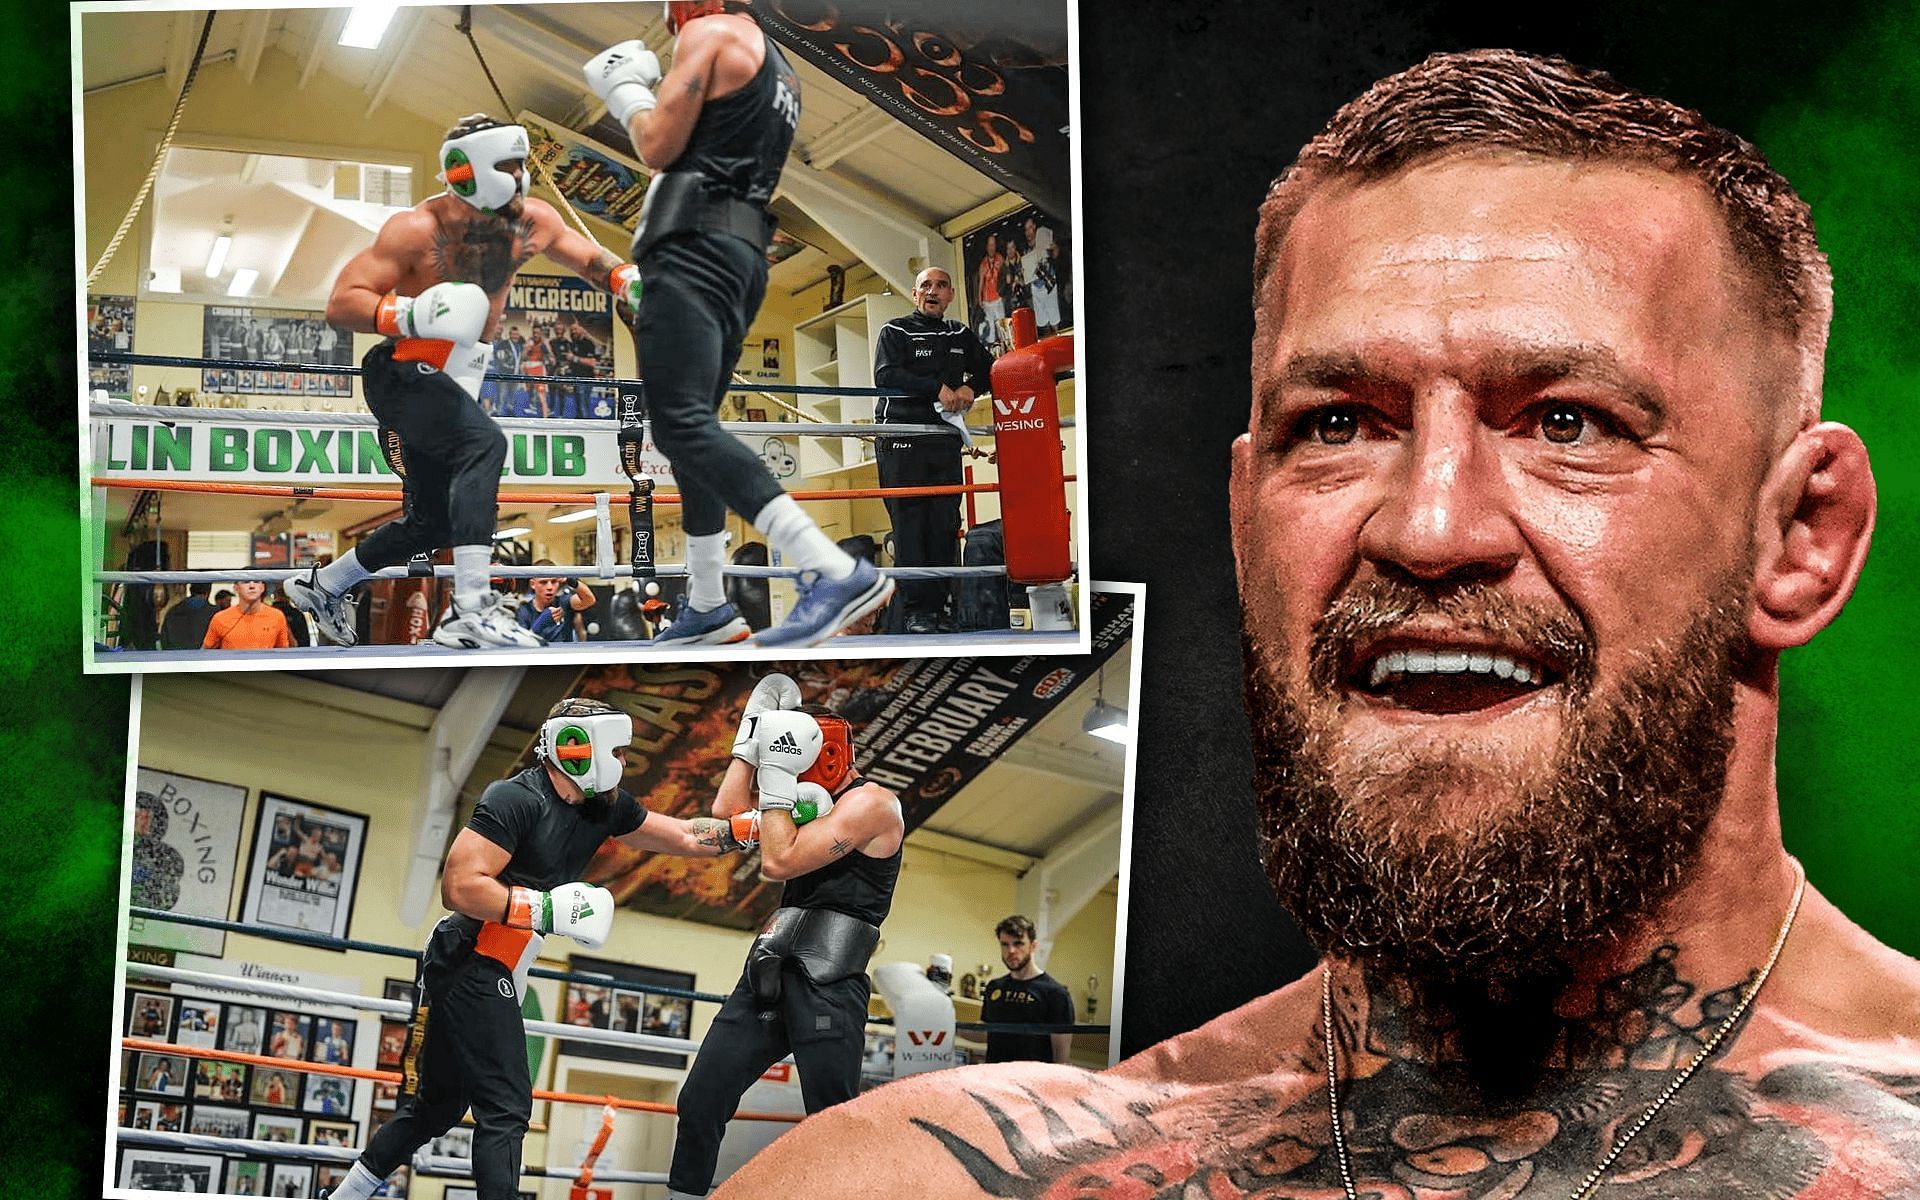 Conor McGregor returned to sparring [Images via @thenotoriousmma on Instagram]